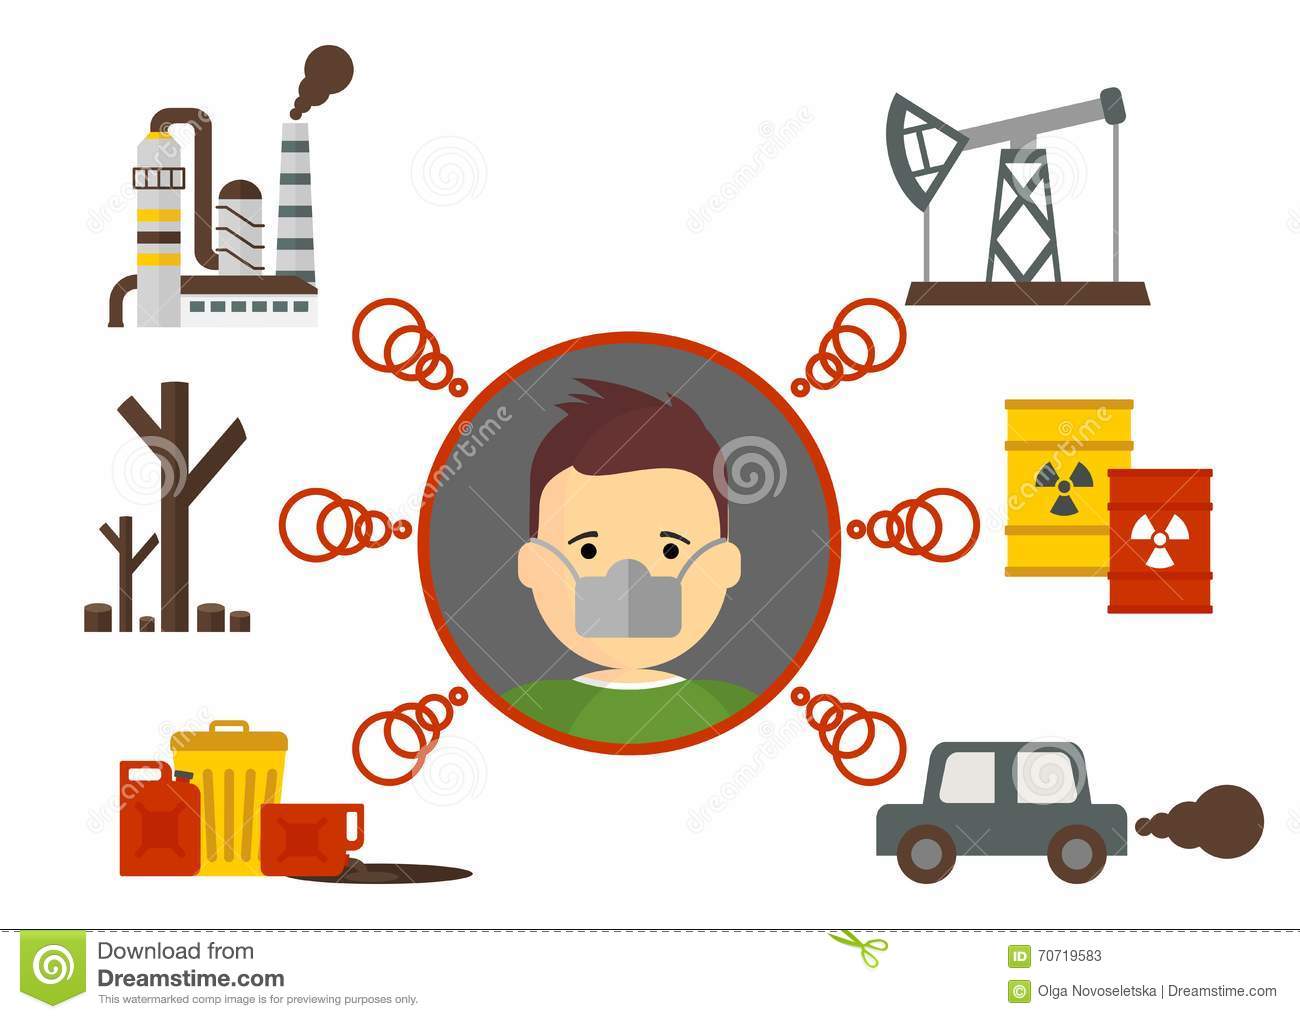 Causes of air pollution Stock Photos